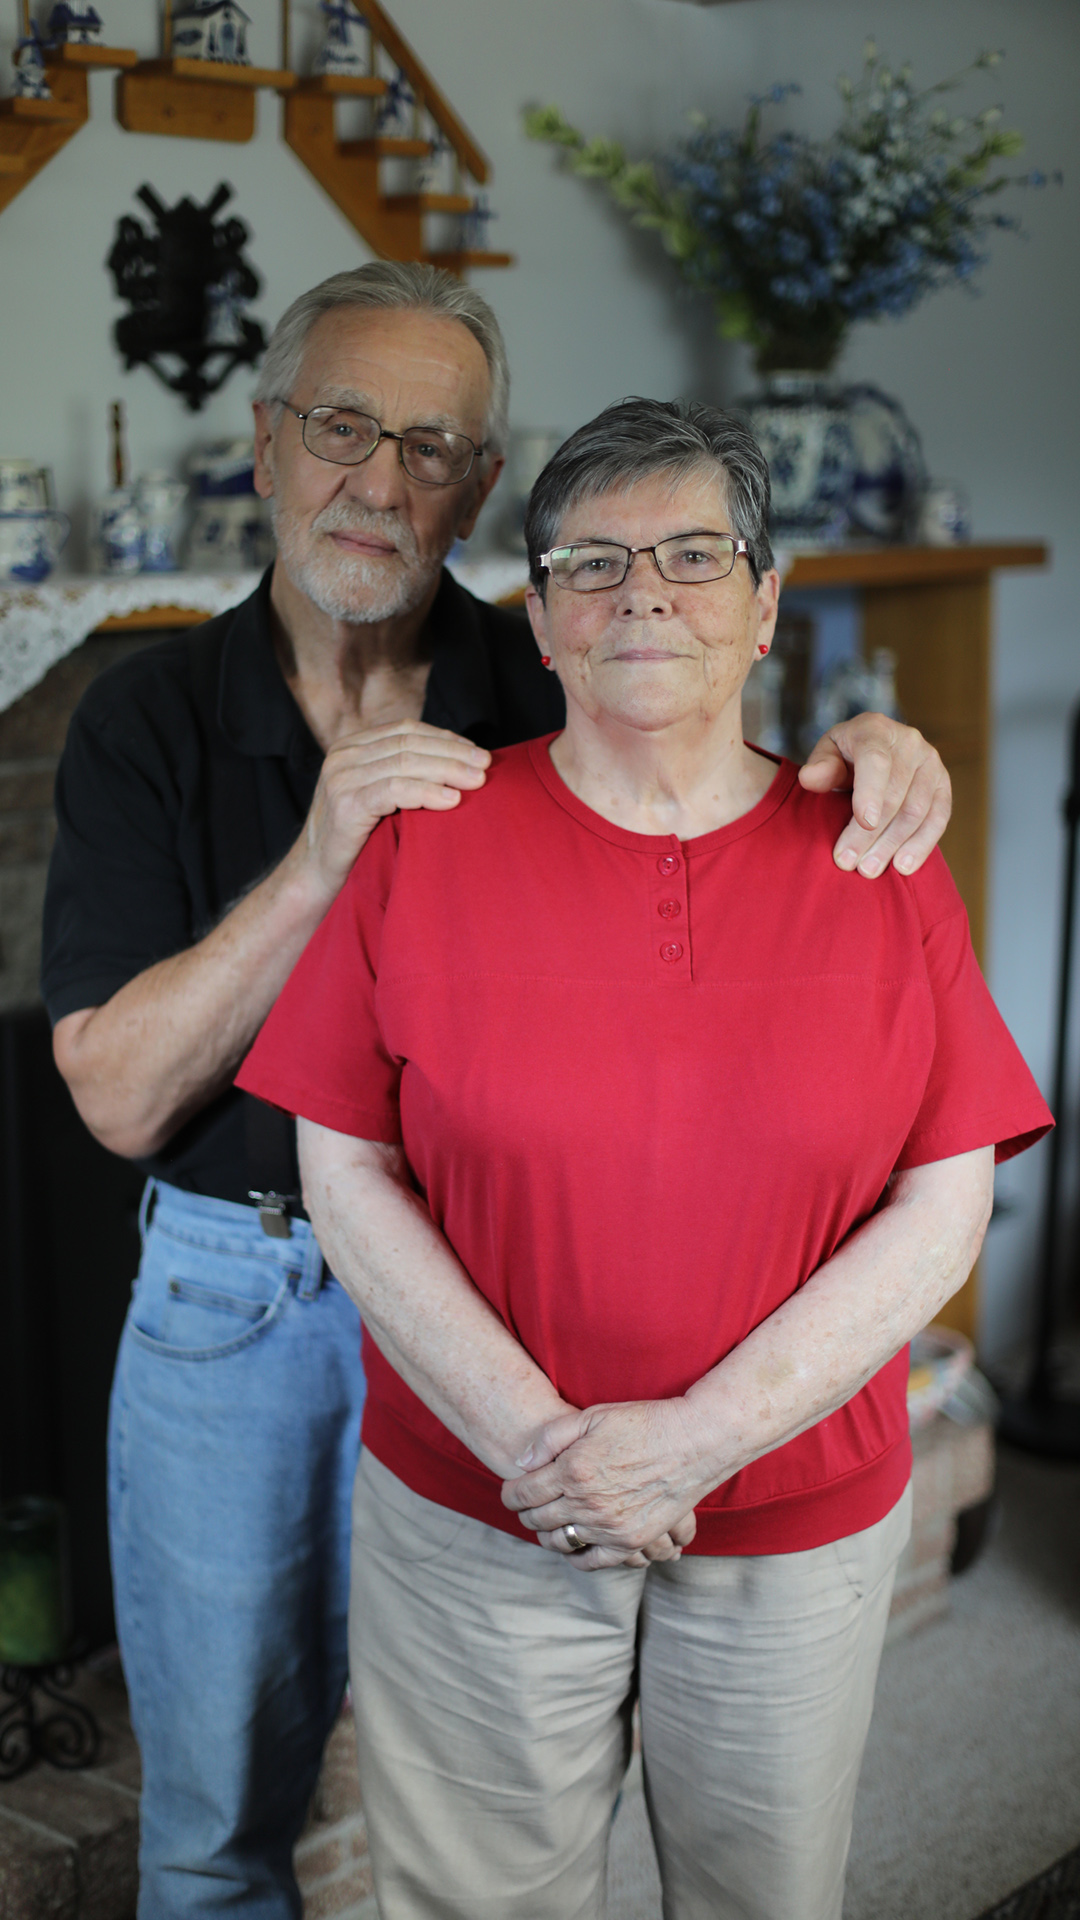 Jim Boisen and Margie Walker pose for a portrait inside a room, with displays of Delft china and a floral arrangement in the background.